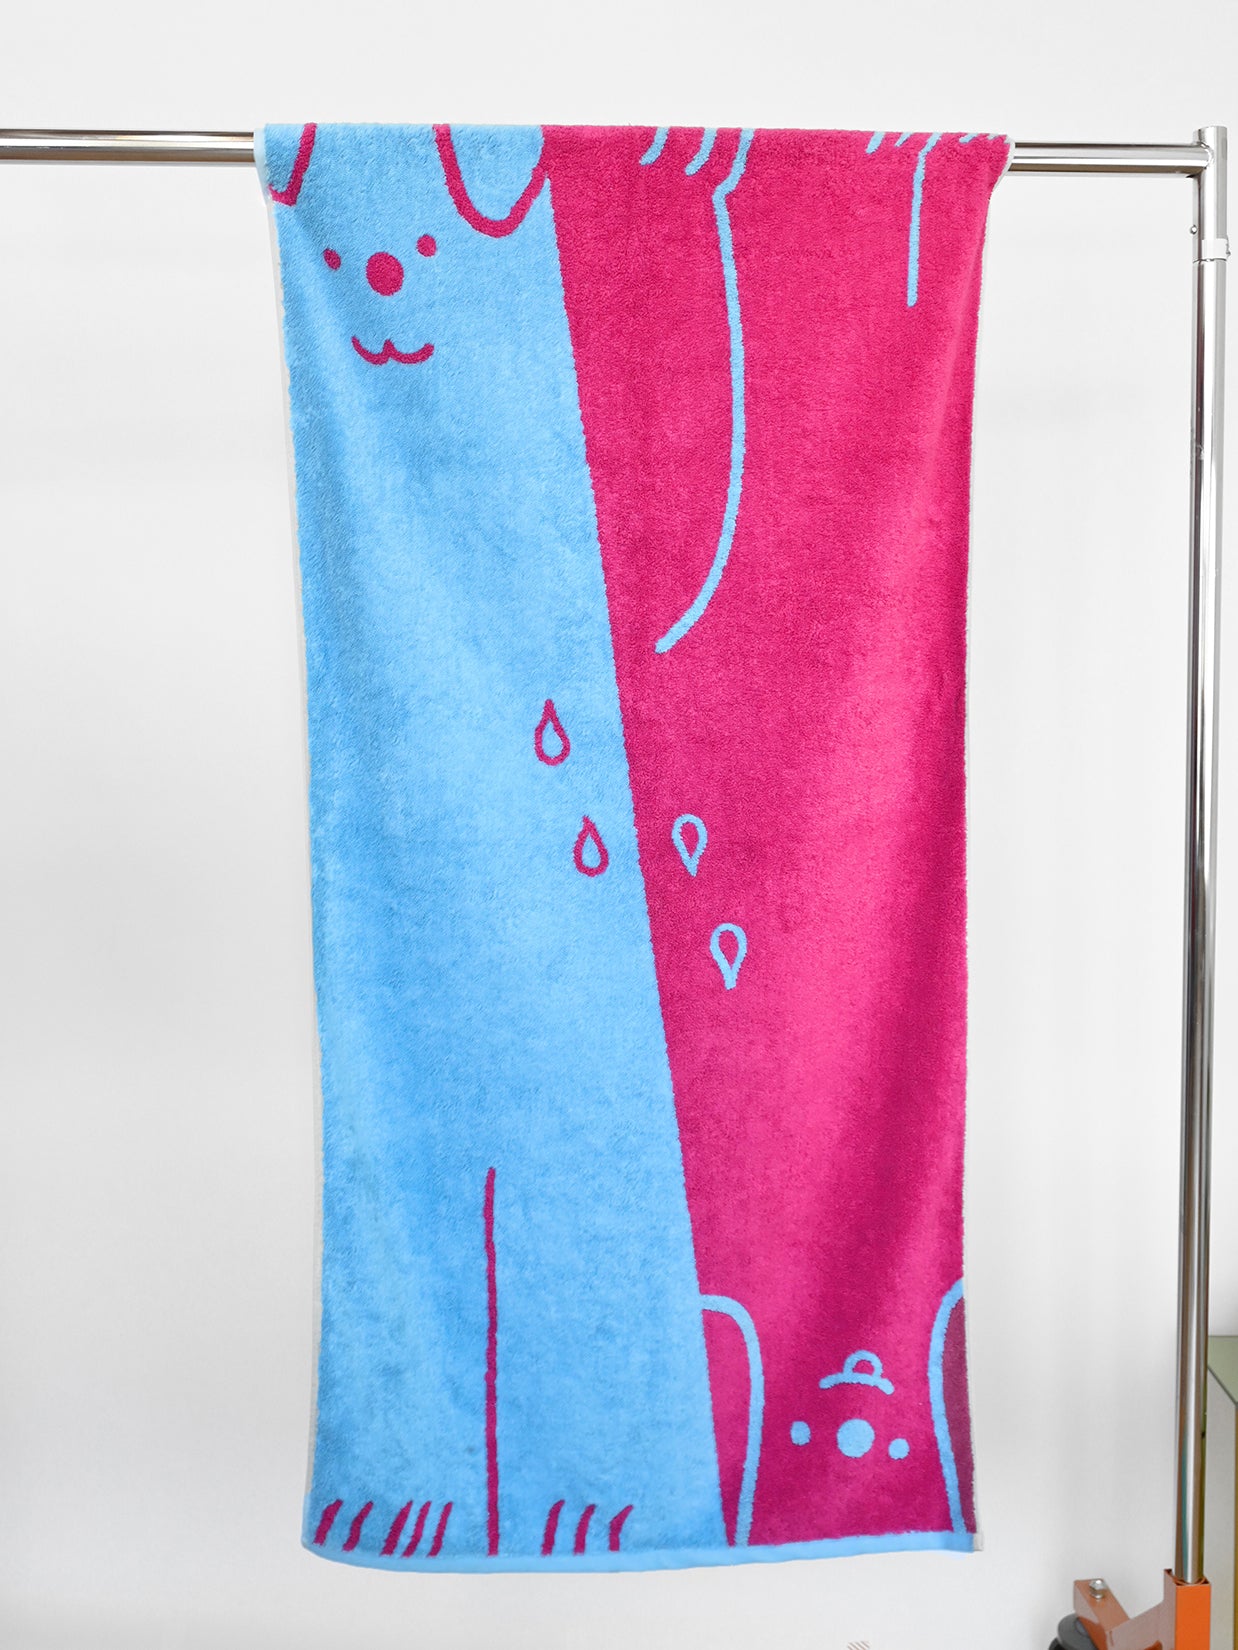 "WET DOGS" collection of terry cloth bath towels and bathmats. By illustrator/designer Natali Koromoto.